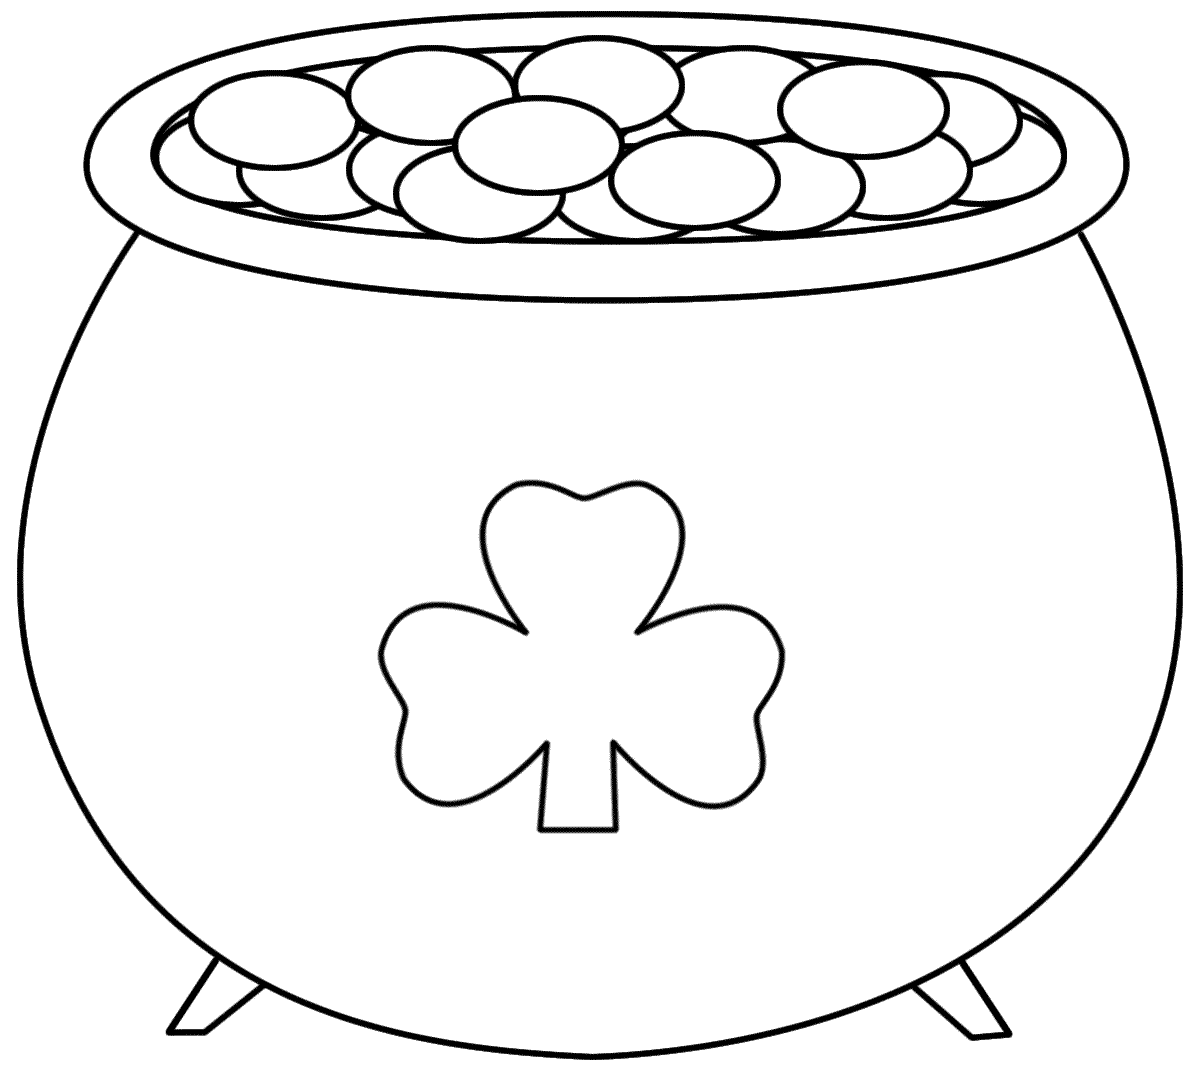 Pot of Gold with Shamrock #2 - Coloring Page (St. Patrick's Day)